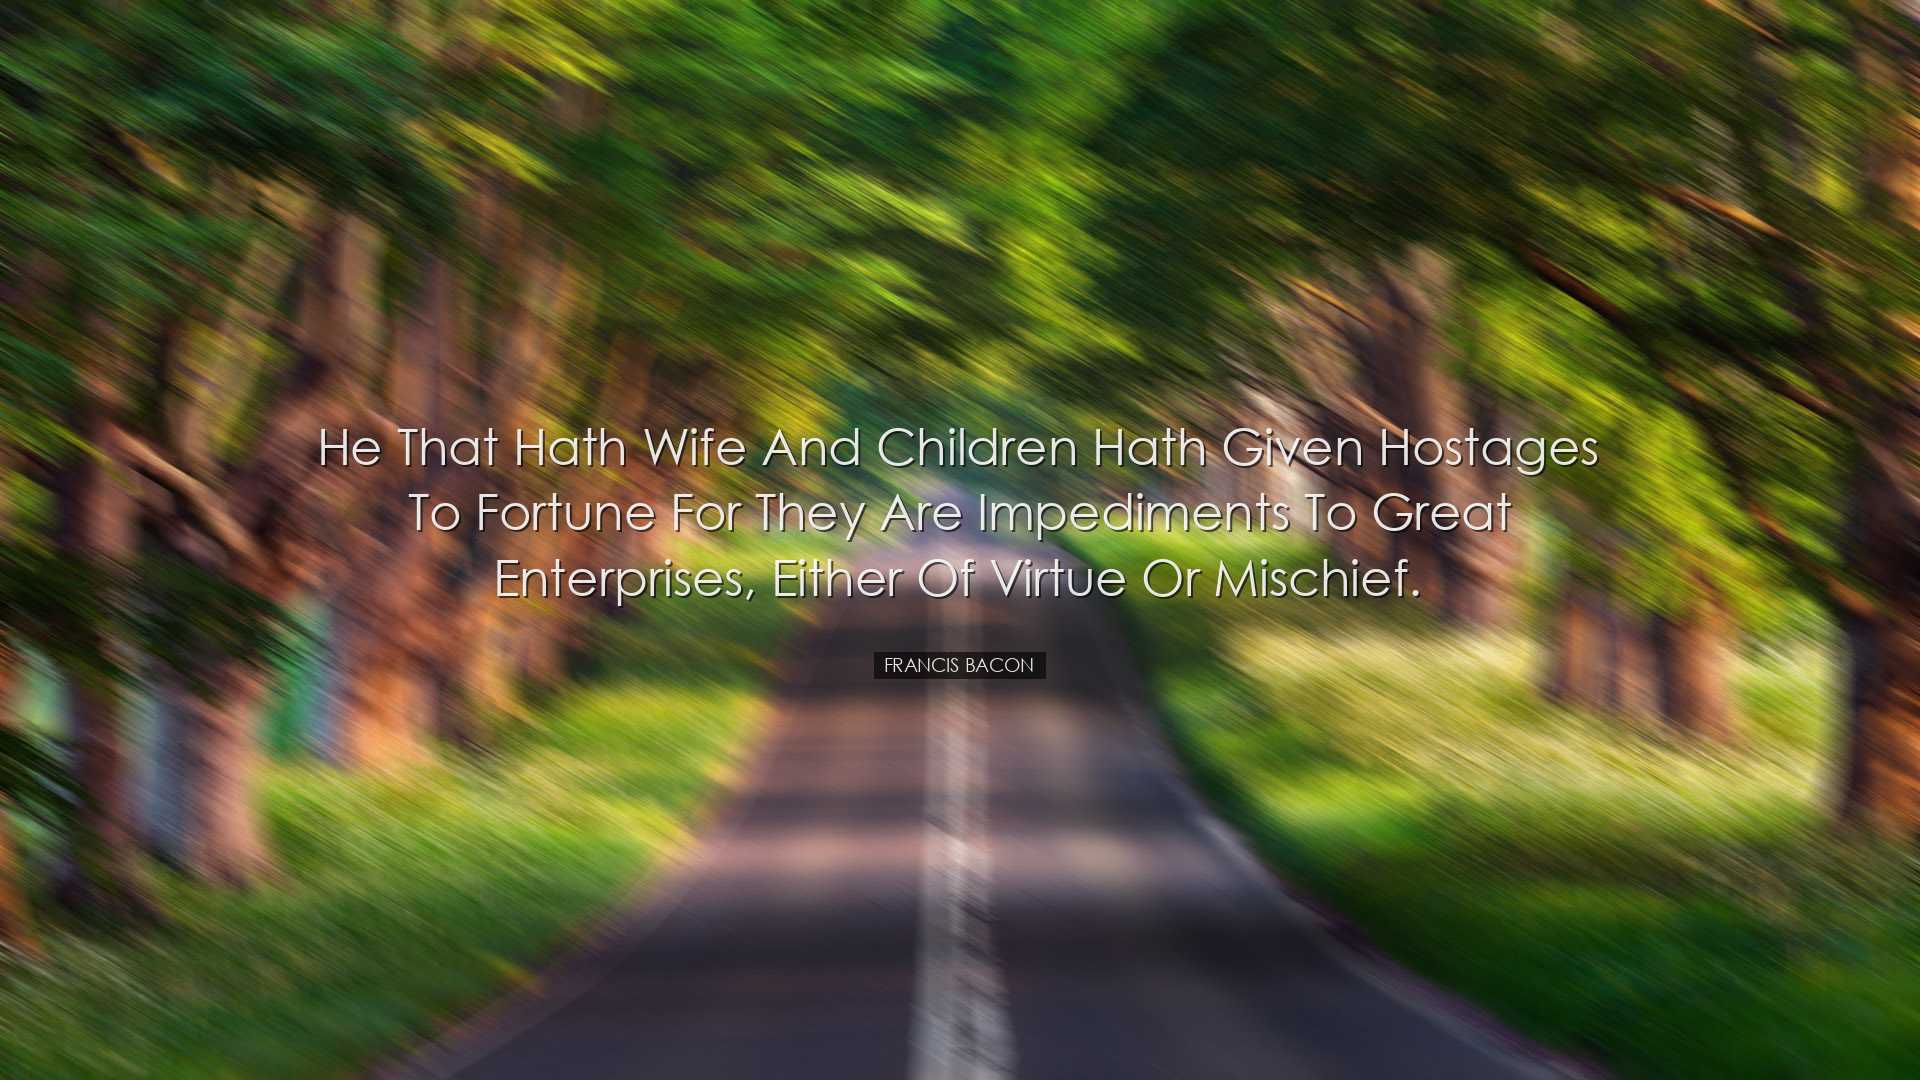 He that hath wife and children hath given hostages to fortune for